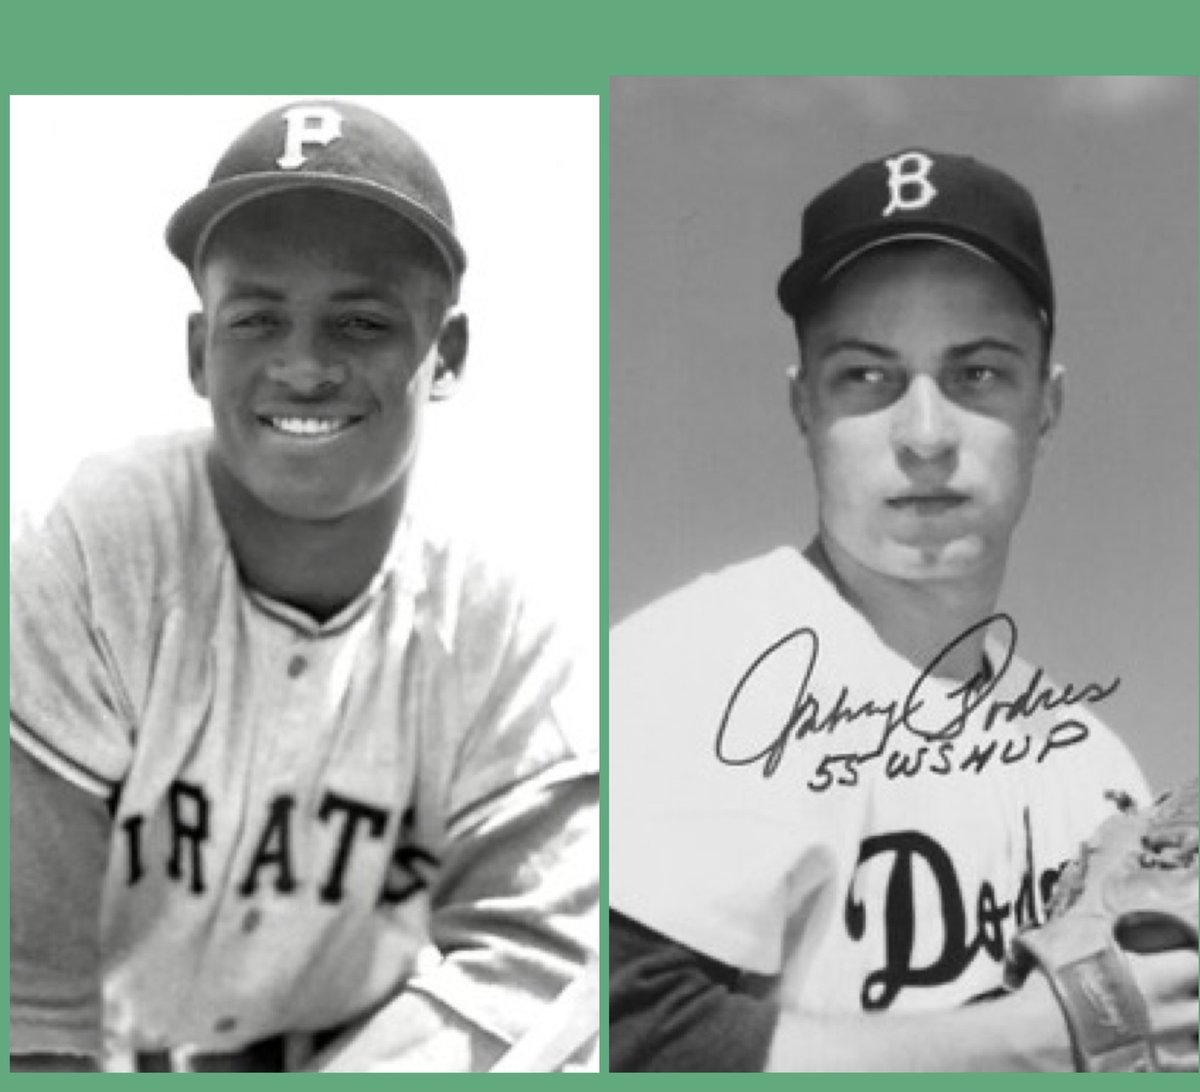 #OTD in 1955, Roberto Clemente made his MLB debut. He slapped a single off Dodgers lefty Johnny Podres (and Jackie Robinson played 3B). The Pirates lost both games of a doubleheader. In the 1st game, Clemente played RF. In the 2nd game, he played CF going 2-for-4 with a double.